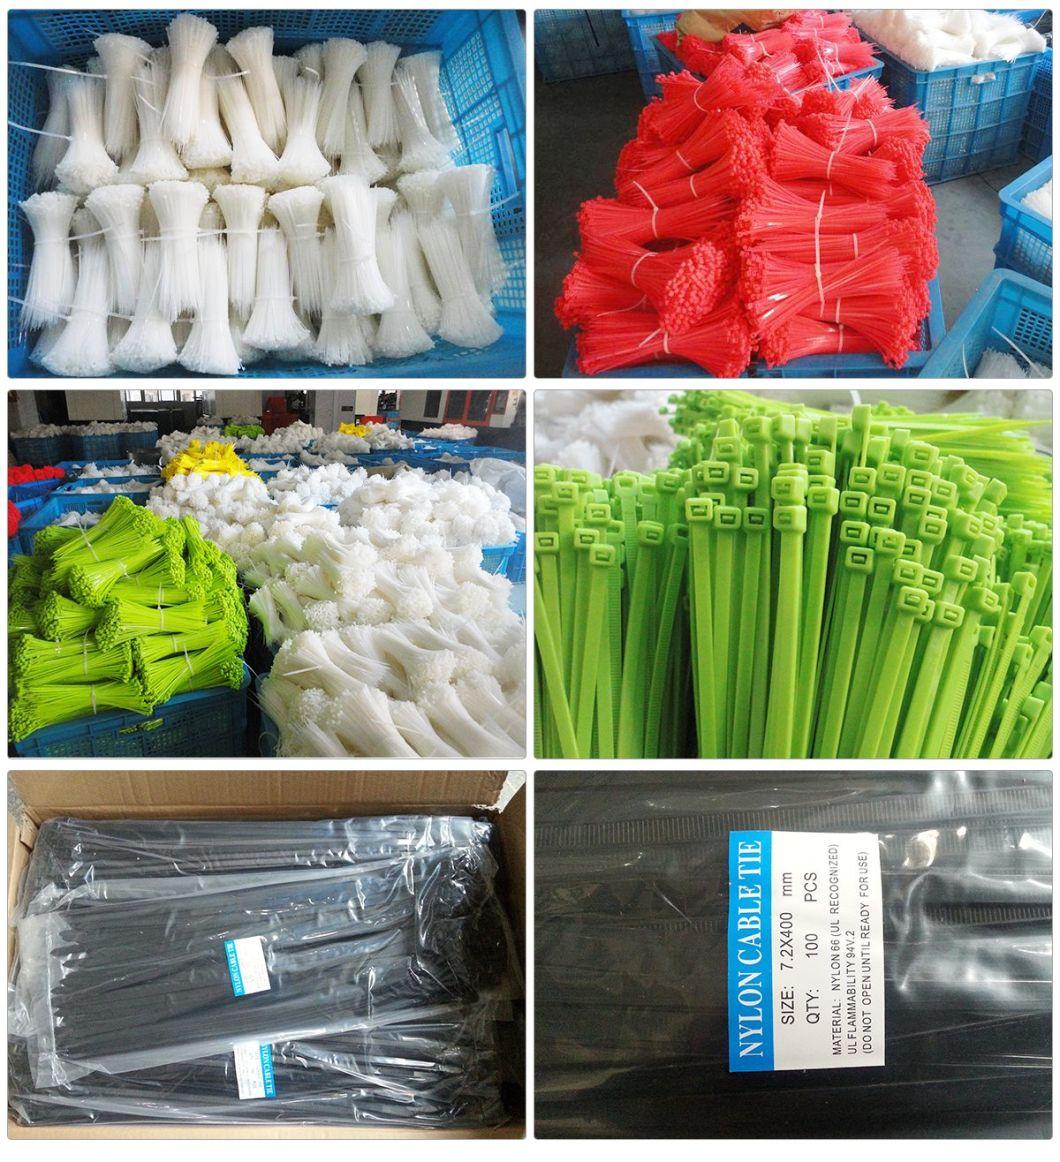 High Tensile Strength Superior Plastic Cable Ties